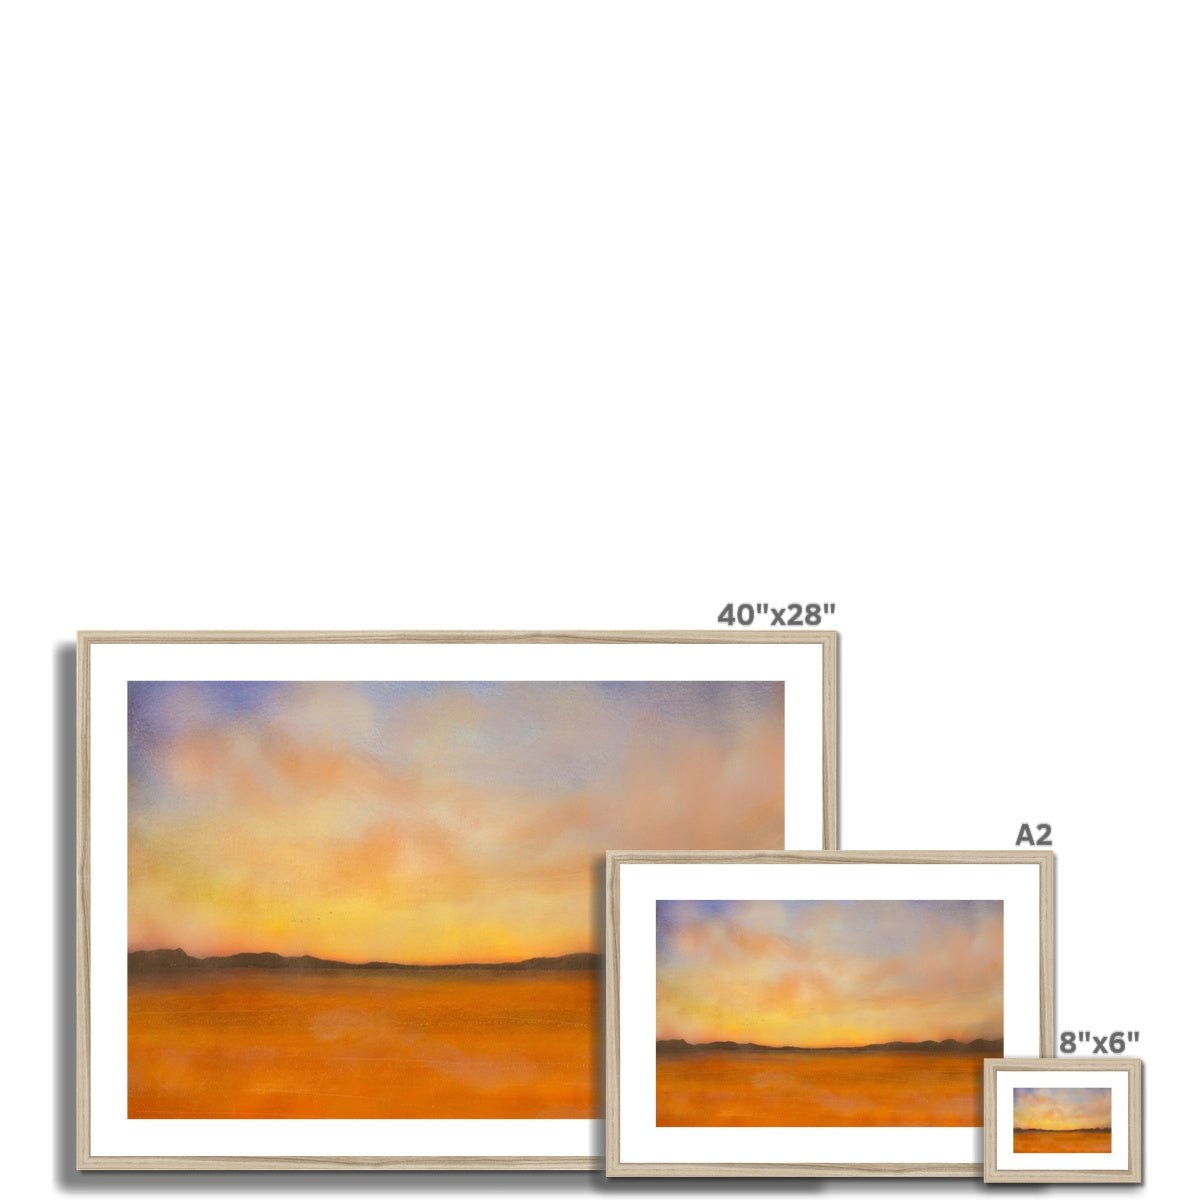 Islay Dawn Painting | Framed & Mounted Prints From Scotland-Framed & Mounted Prints-Hebridean Islands Art Gallery-Paintings, Prints, Homeware, Art Gifts From Scotland By Scottish Artist Kevin Hunter